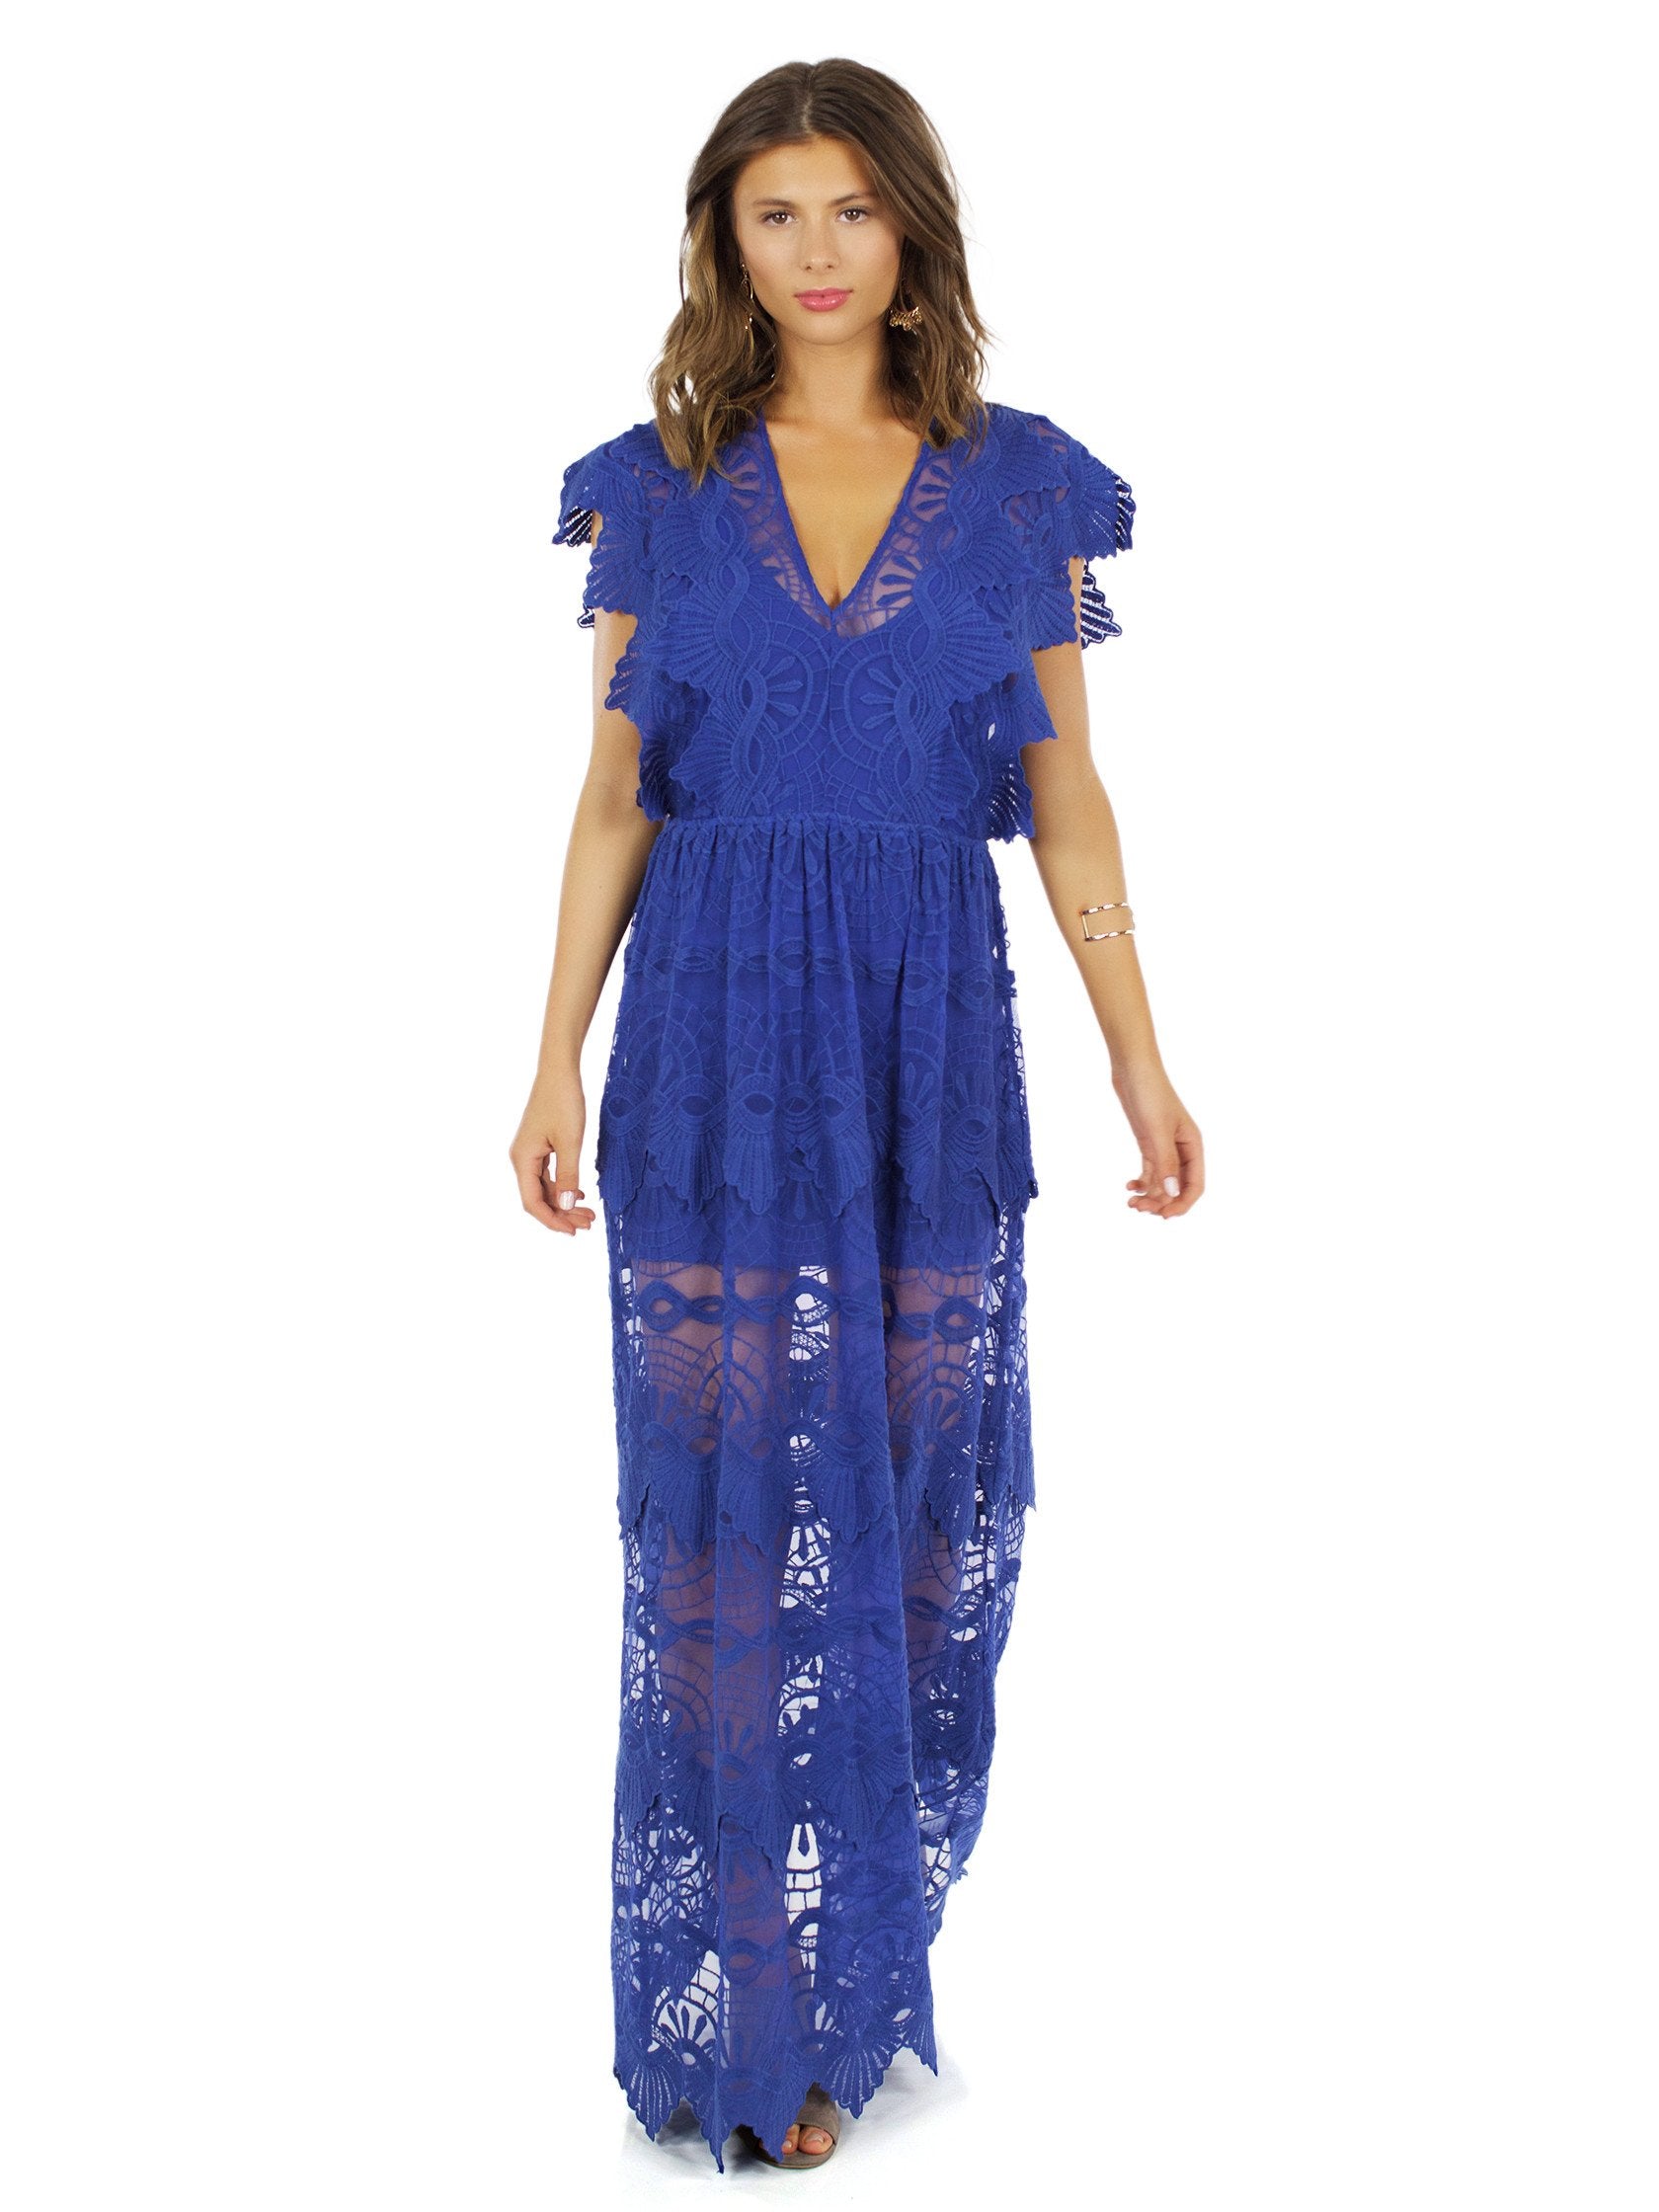 Woman wearing a dress rental from Nightcap Clothing called Mayan Lace Gown